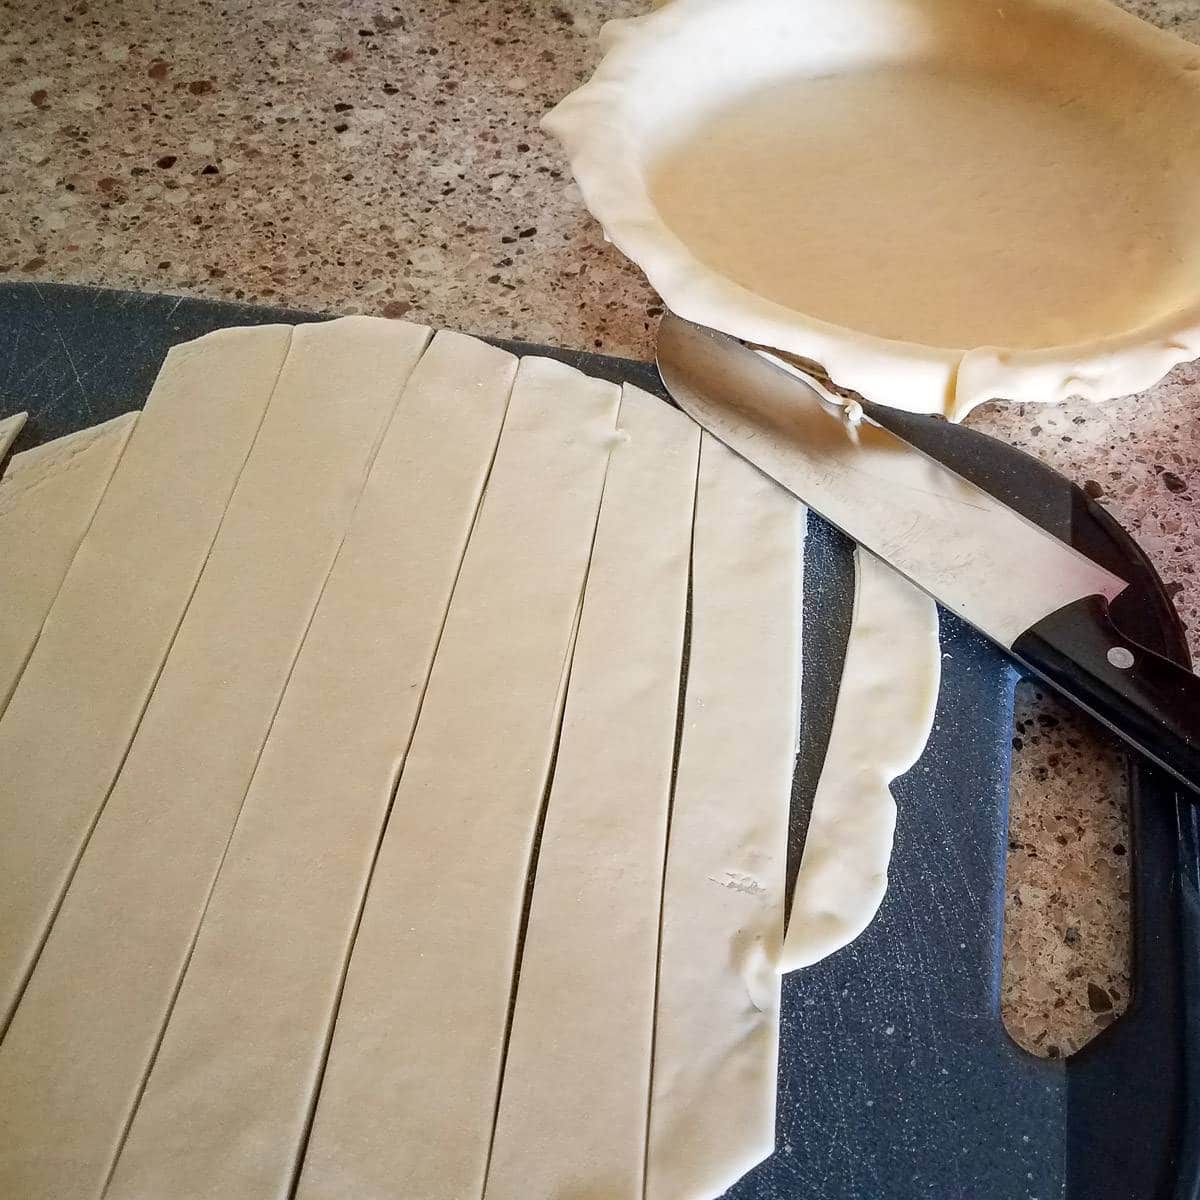 lattice crust being cut for apricot pie